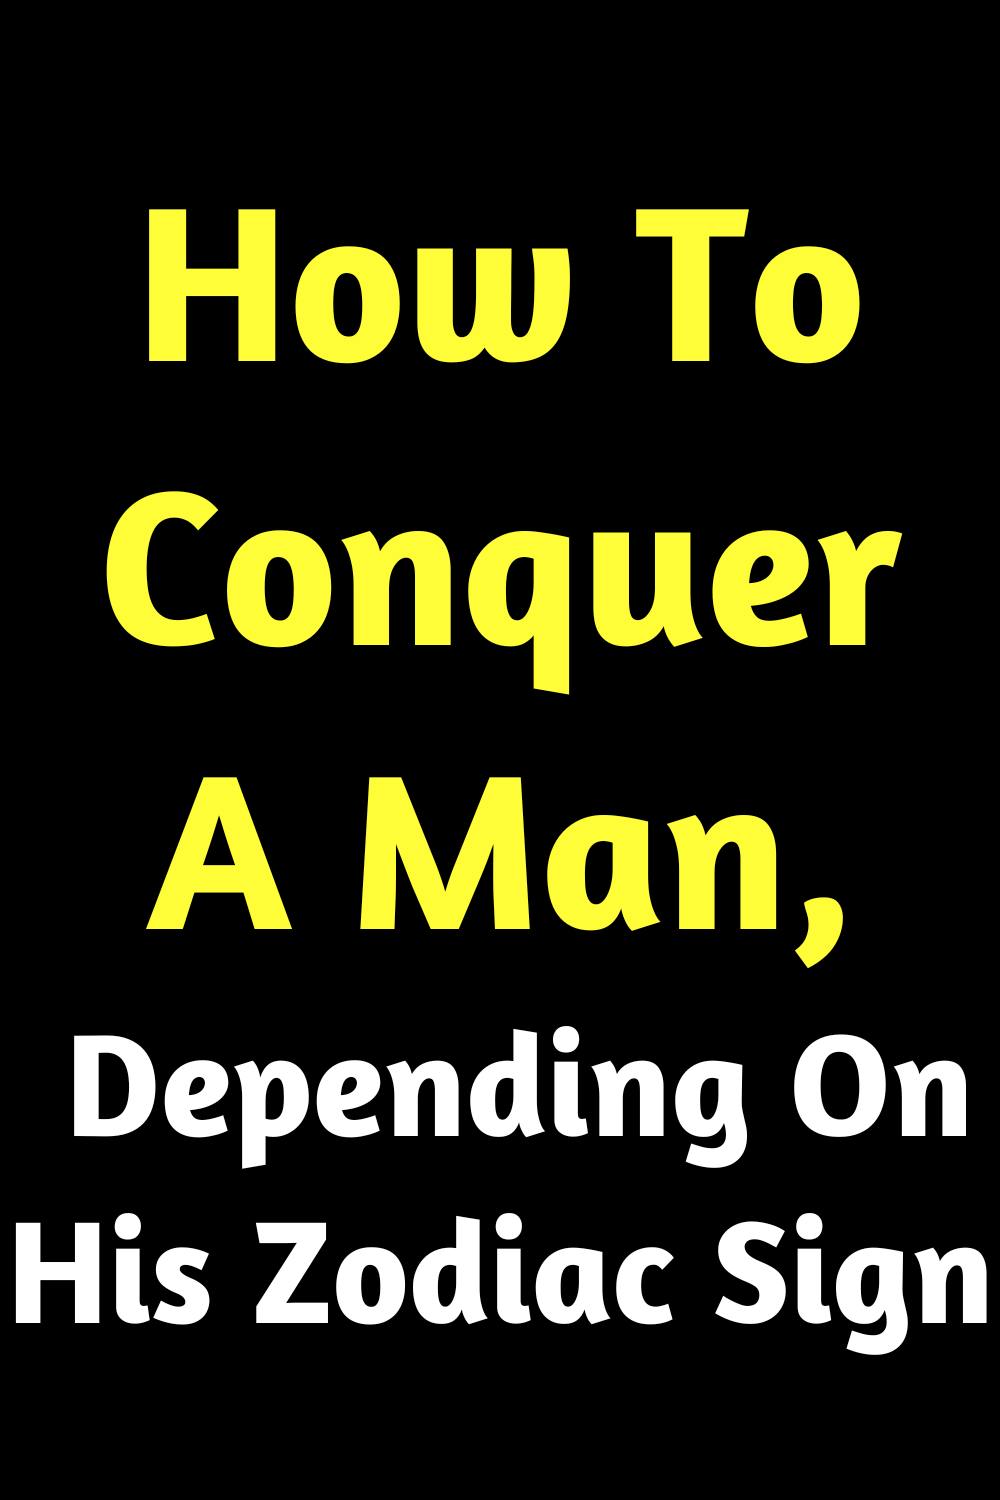 How To Conquer A Man, Depending On His Zodiac Sign